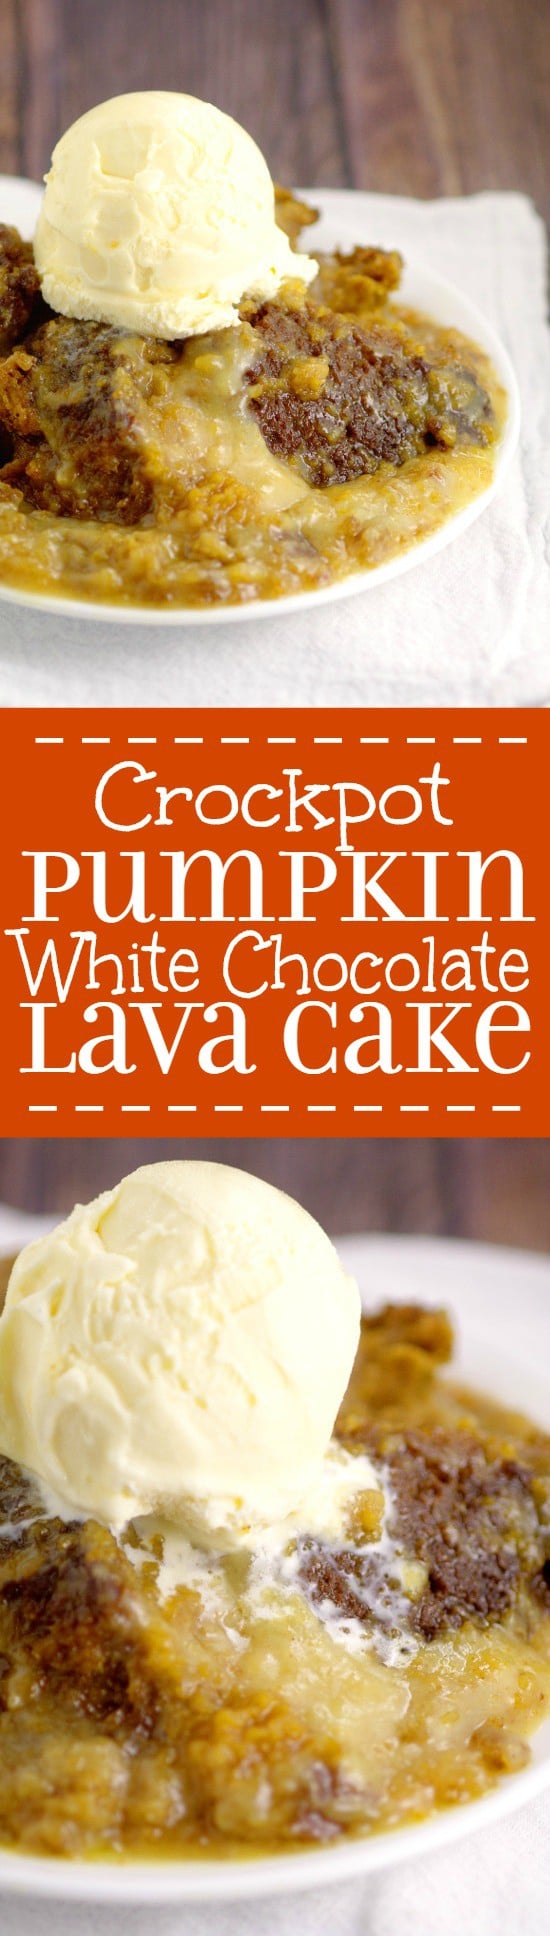 Crockpot Pumpkin White Chocolate Lava Cake is a decadent slow cooker dessert recipe with moist Pumpkin Spice cake and smooth, hot white chocolate filling. Pumpkin spice and white chocolate?! Must try!